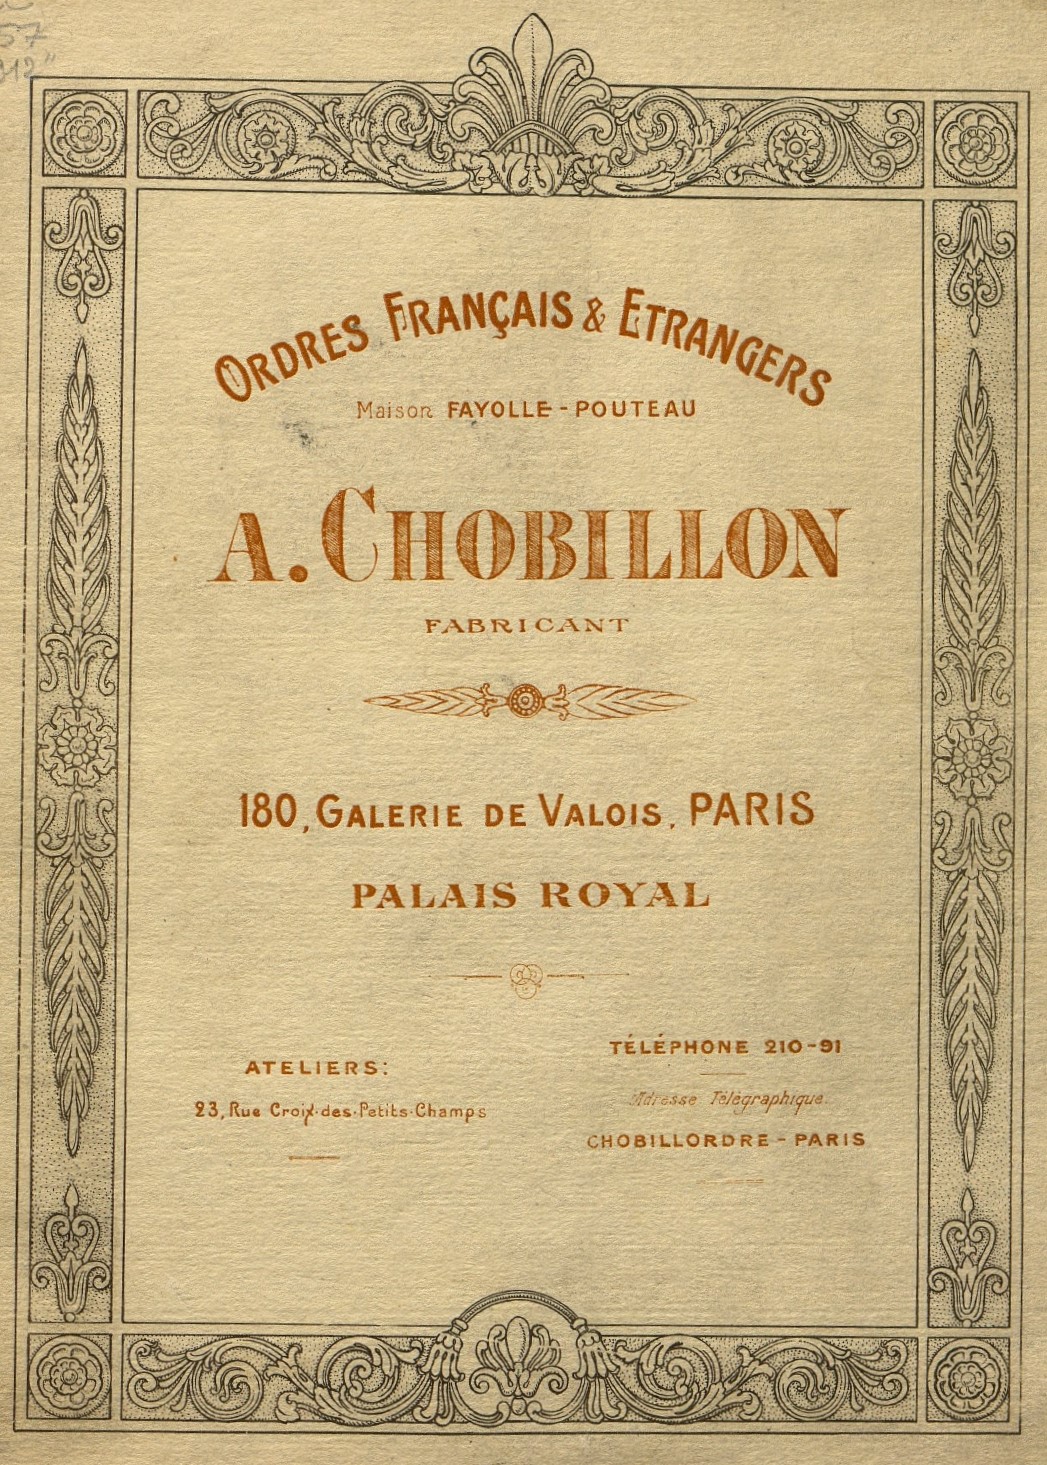 Imperial  Russian Orders made by Chobillion, Paris.jpg